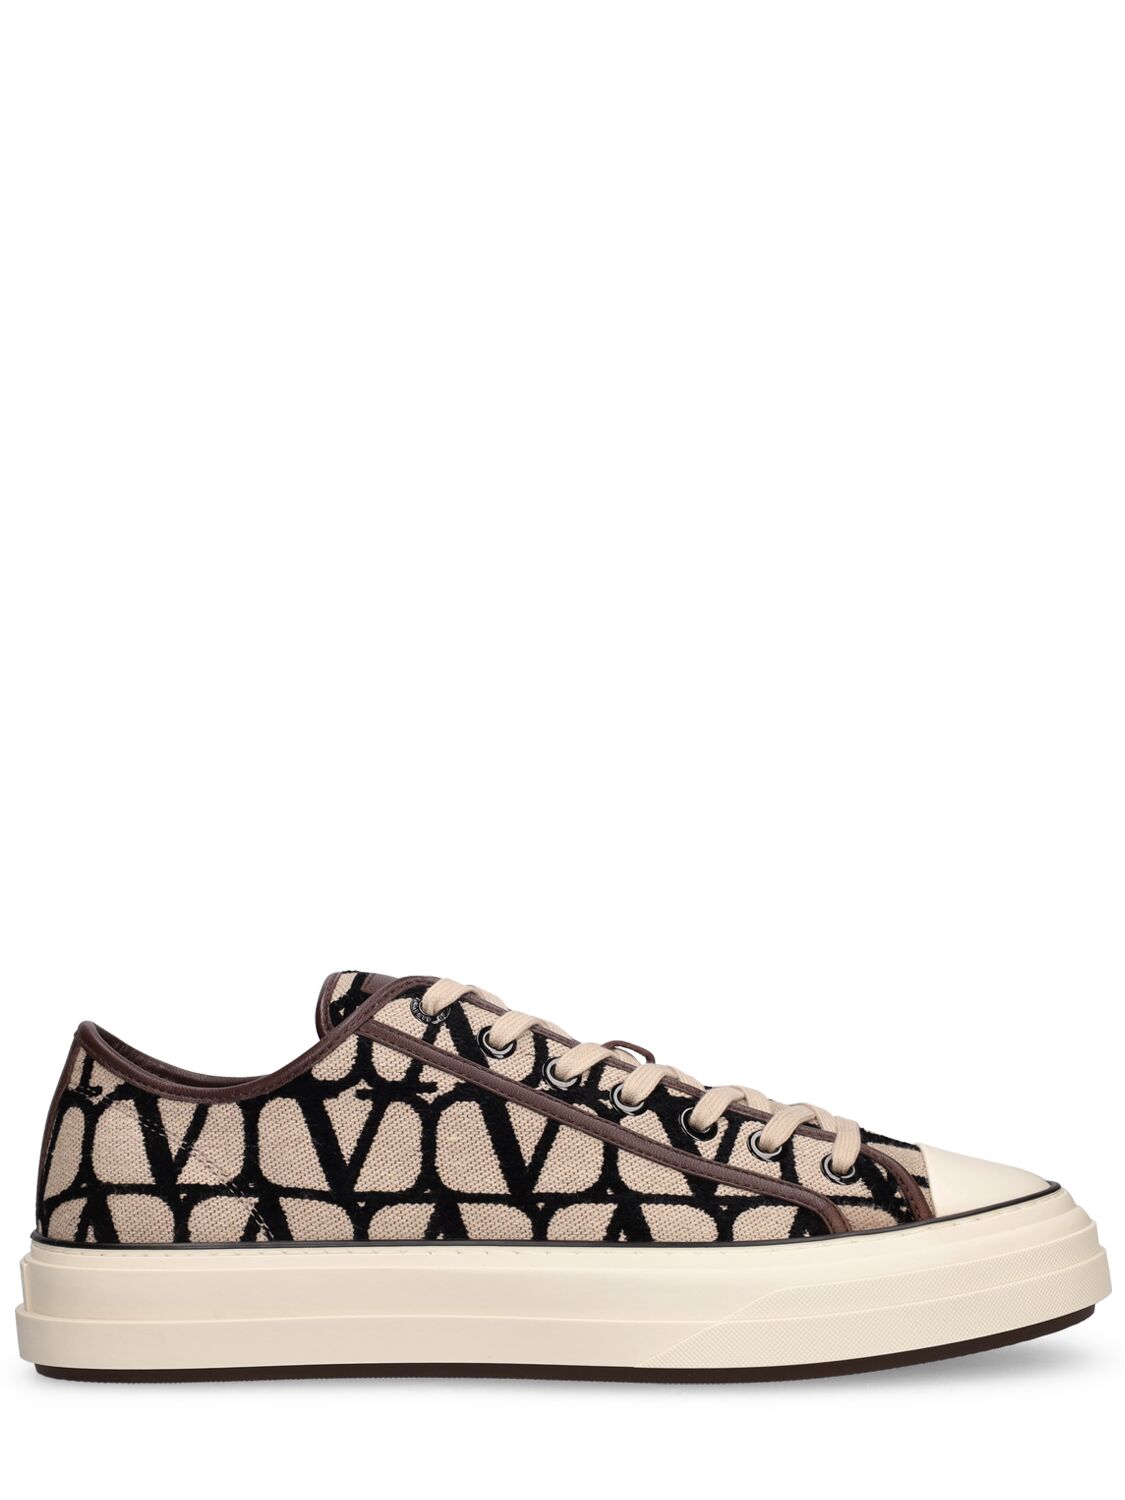 Toile Iconographe Low Top Sneakers – MEN > SHOES > SNEAKERS